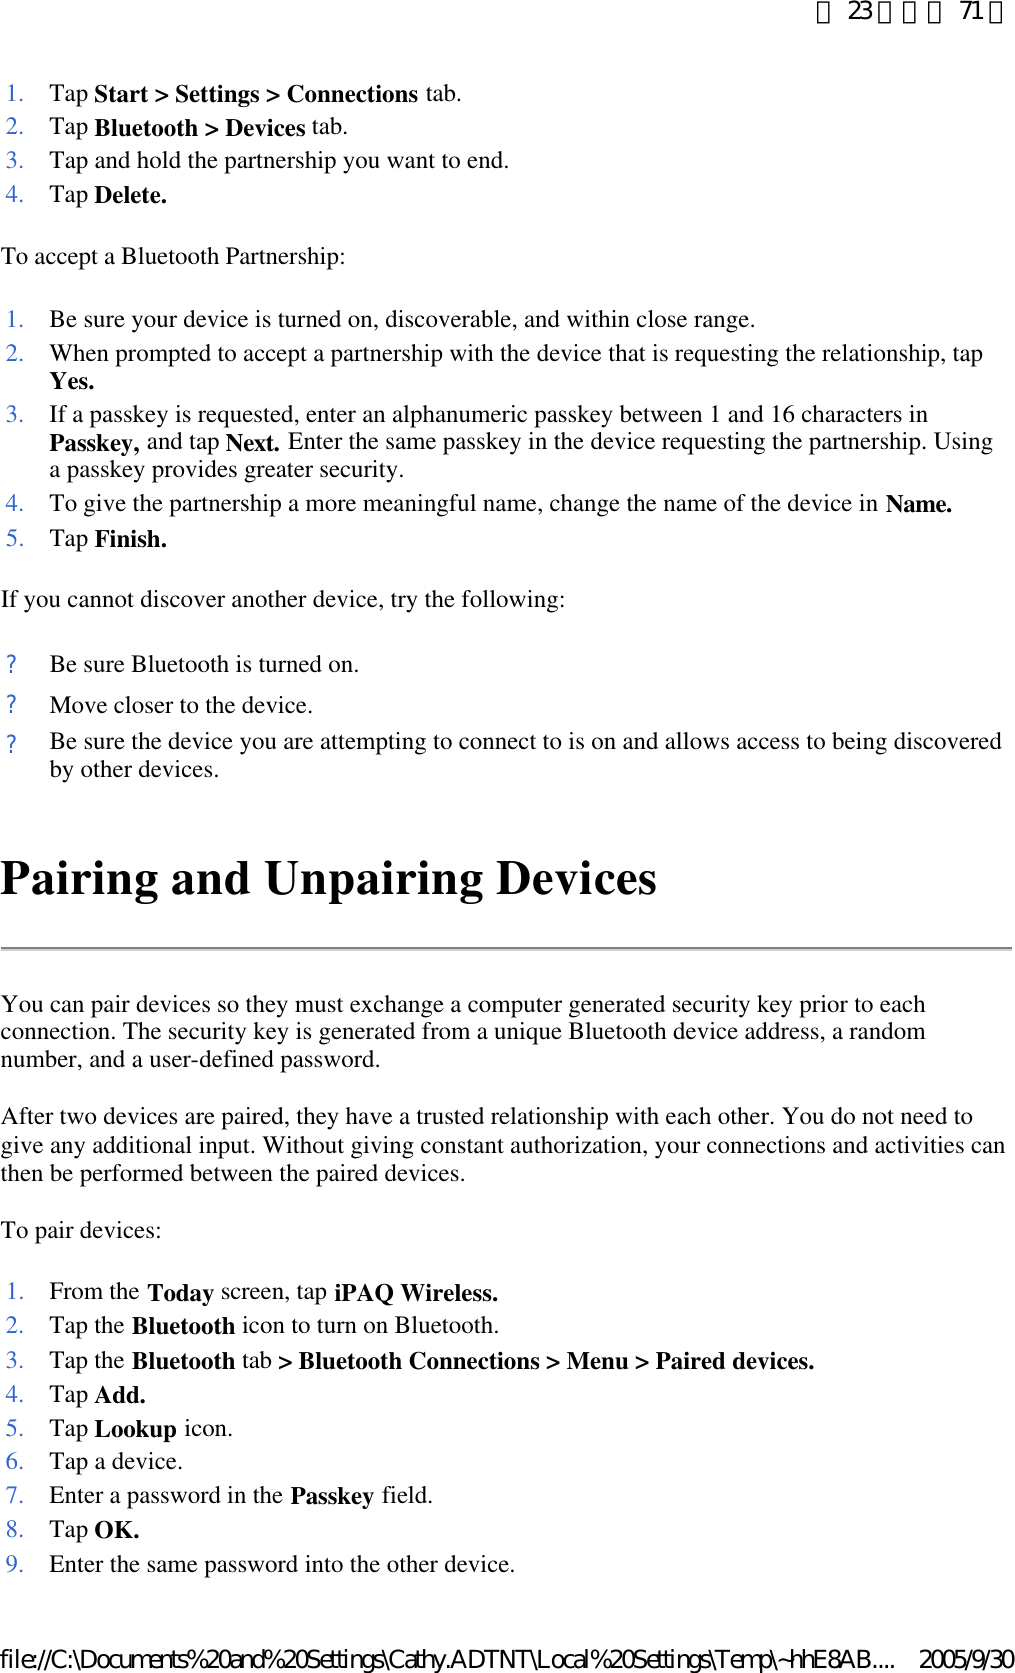 To accept a Bluetooth Partnership:  If you cannot discover another device, try the following: Pairing and Unpairing Devices You can pair devices so they must exchange a computer generated security key prior to each connection. The security key is generated from a unique Bluetooth device address, a random number, and a user-defined password.  After two devices are paired, they have a trusted relationship with each other. You do not need to give any additional input. Without giving constant authorization, your connections and activities can then be performed between the paired devices.  To pair devices: 1. Tap Start &gt; Settings &gt; Connections tab. 2. Tap Bluetooth &gt; Devices tab. 3. Tap and hold the partnership you want to end.4. Tap Delete.1. Be sure your device is turned on, discoverable, and within close range. 2. When prompted to accept a partnership with the device that is requesting the relationship, tap Yes.3. If a passkey is requested, enter an alphanumeric passkey between 1 and 16 characters in Passkey, and tap Next. Enter the same passkey in the device requesting the partnership. Using a passkey provides greater security. 4. To give the partnership a more meaningful name, change the name of the device in Name.5. Tap Finish.?Be sure Bluetooth is turned on.?Move closer to the device.?Be sure the device you are attempting to connect to is on and allows access to being discovered by other devices.1. From the Today screen, tap iPAQ Wireless.2. Tap the Bluetooth icon to turn on Bluetooth. 3. Tap the Bluetooth tab &gt; Bluetooth Connections &gt; Menu &gt; Paired devices.4. Tap Add.5. Tap Lookup icon. 6. Tap a device.7. Enter a password in the Passkey field. 8. Tap OK.9. Enter the same password into the other device. 第 23 頁，共 71 頁2005/9/30file://C:\Documents%20and%20Settings\Cathy.ADTNT\Local%20Settings\Temp\~hhE8AB....